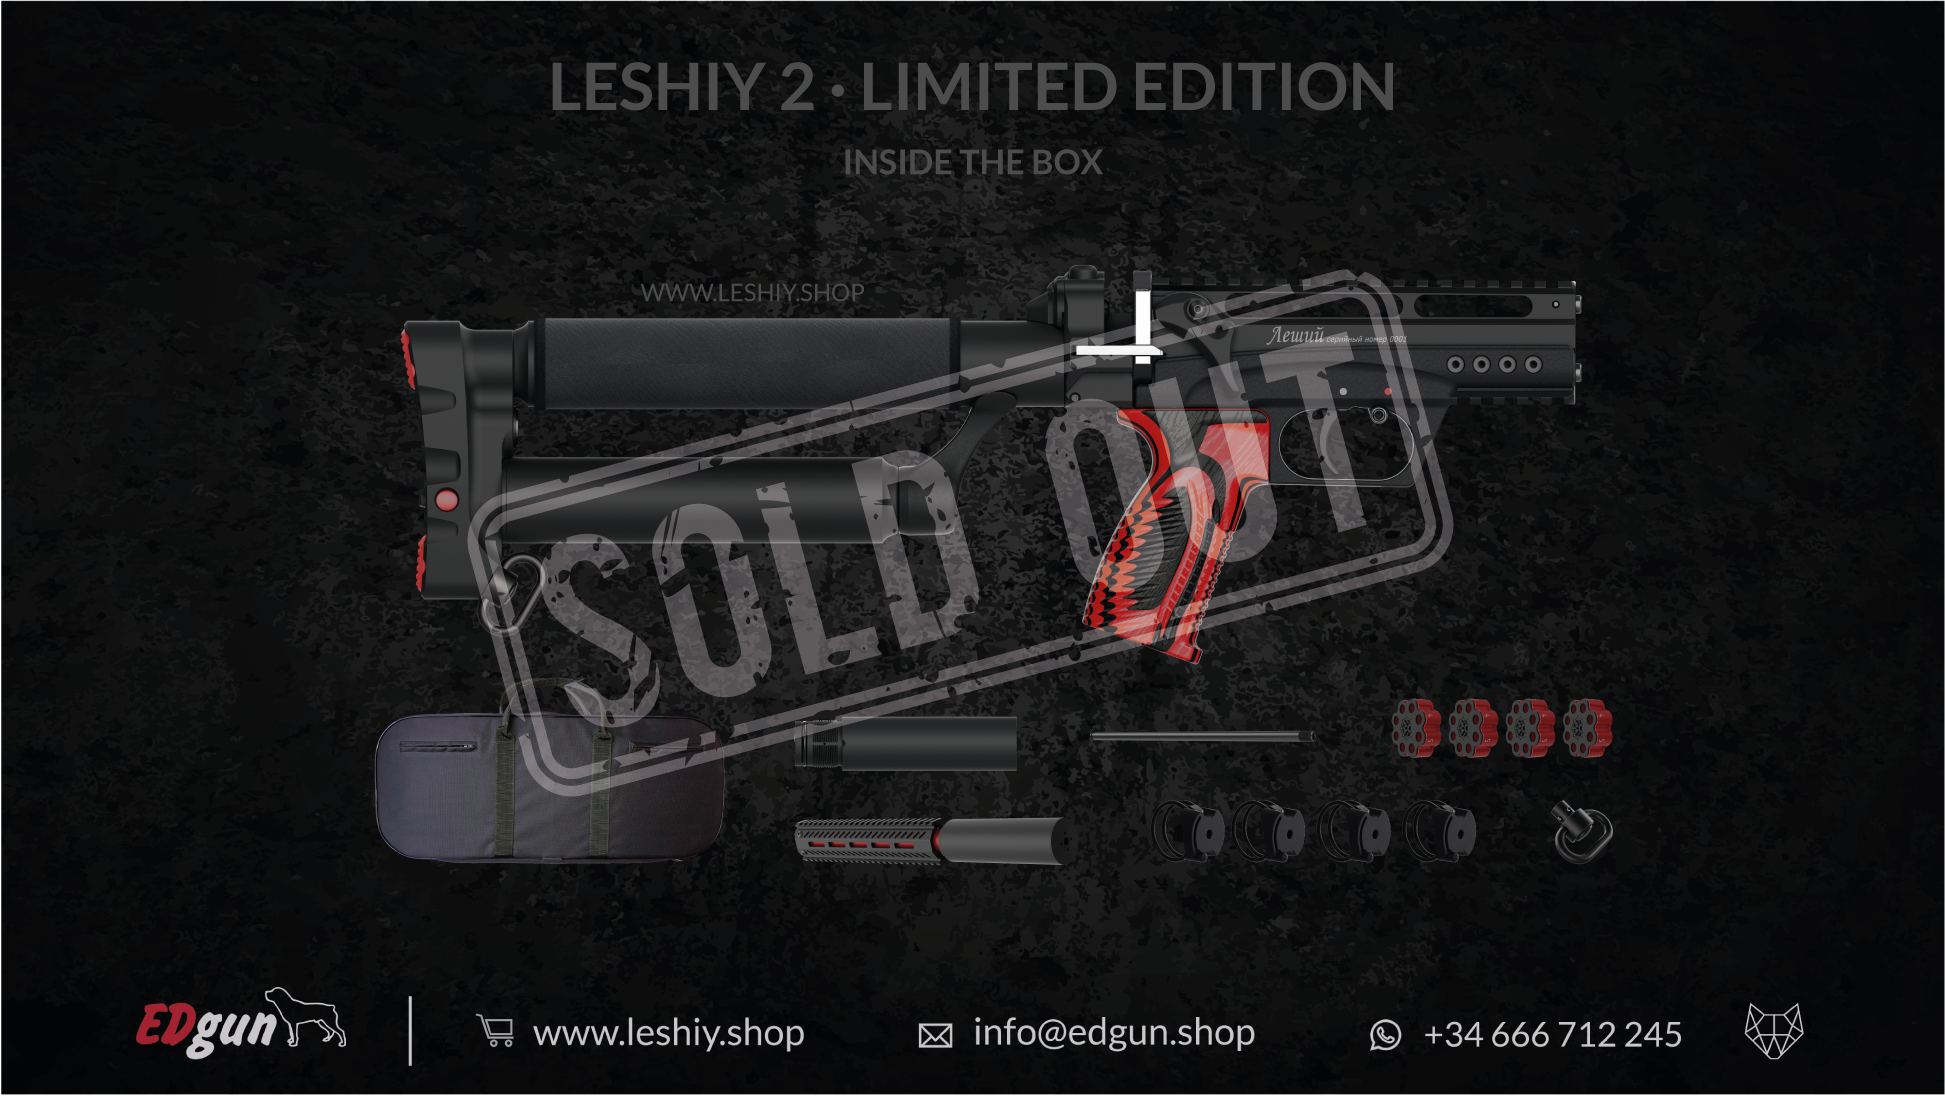 Leshiy 2 Limited Edition · Tuned by Francisco